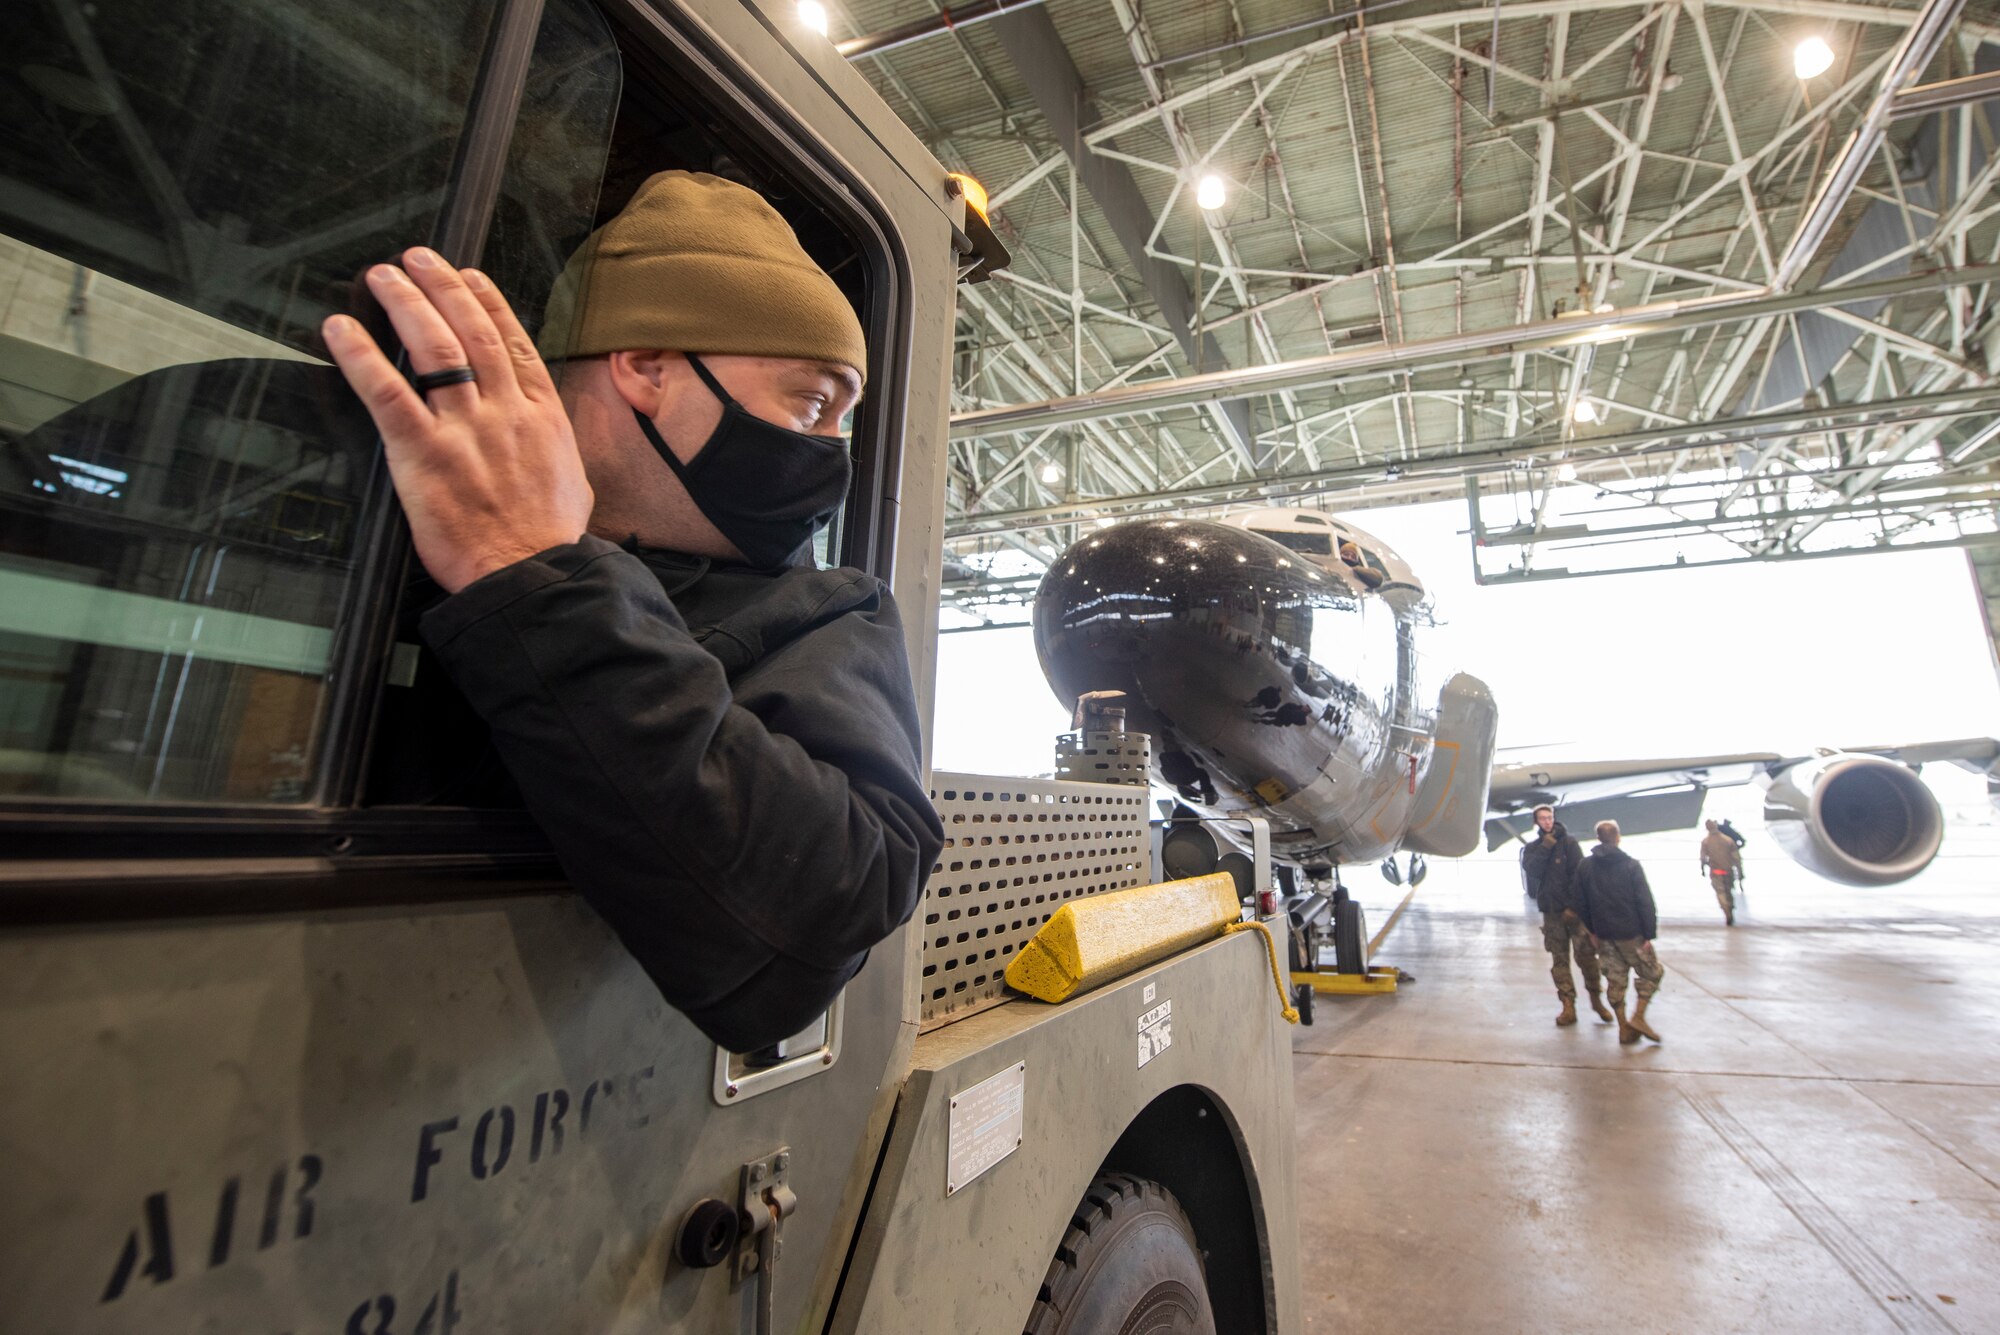 An Airman tows an aircraft into the North Hangar at Lincoln Airport during a proof of concept exercise Oct. 23, 2020.